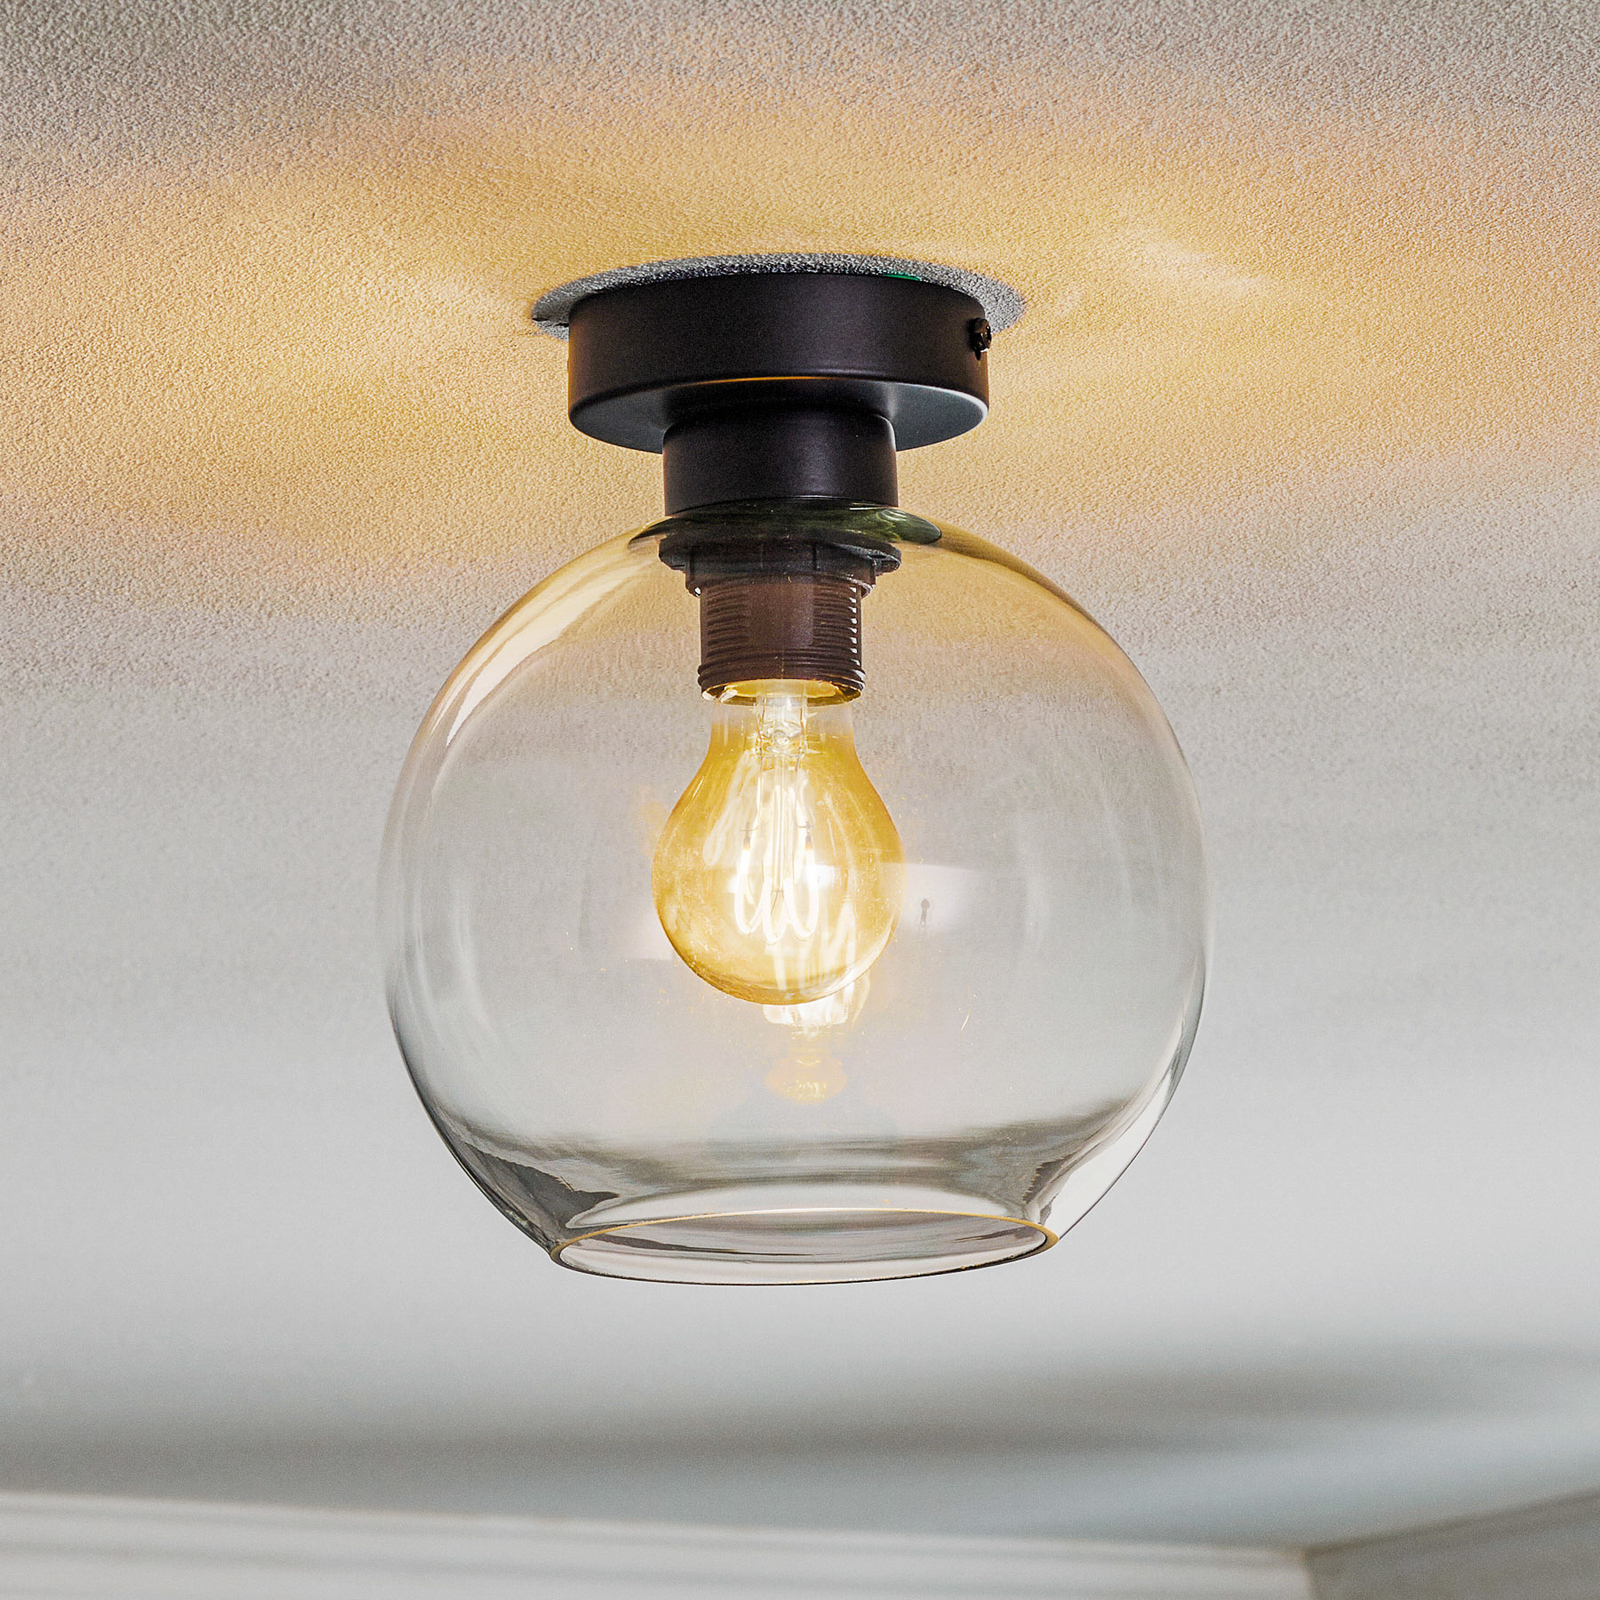 Sofia ceiling light, clear glass lampshade